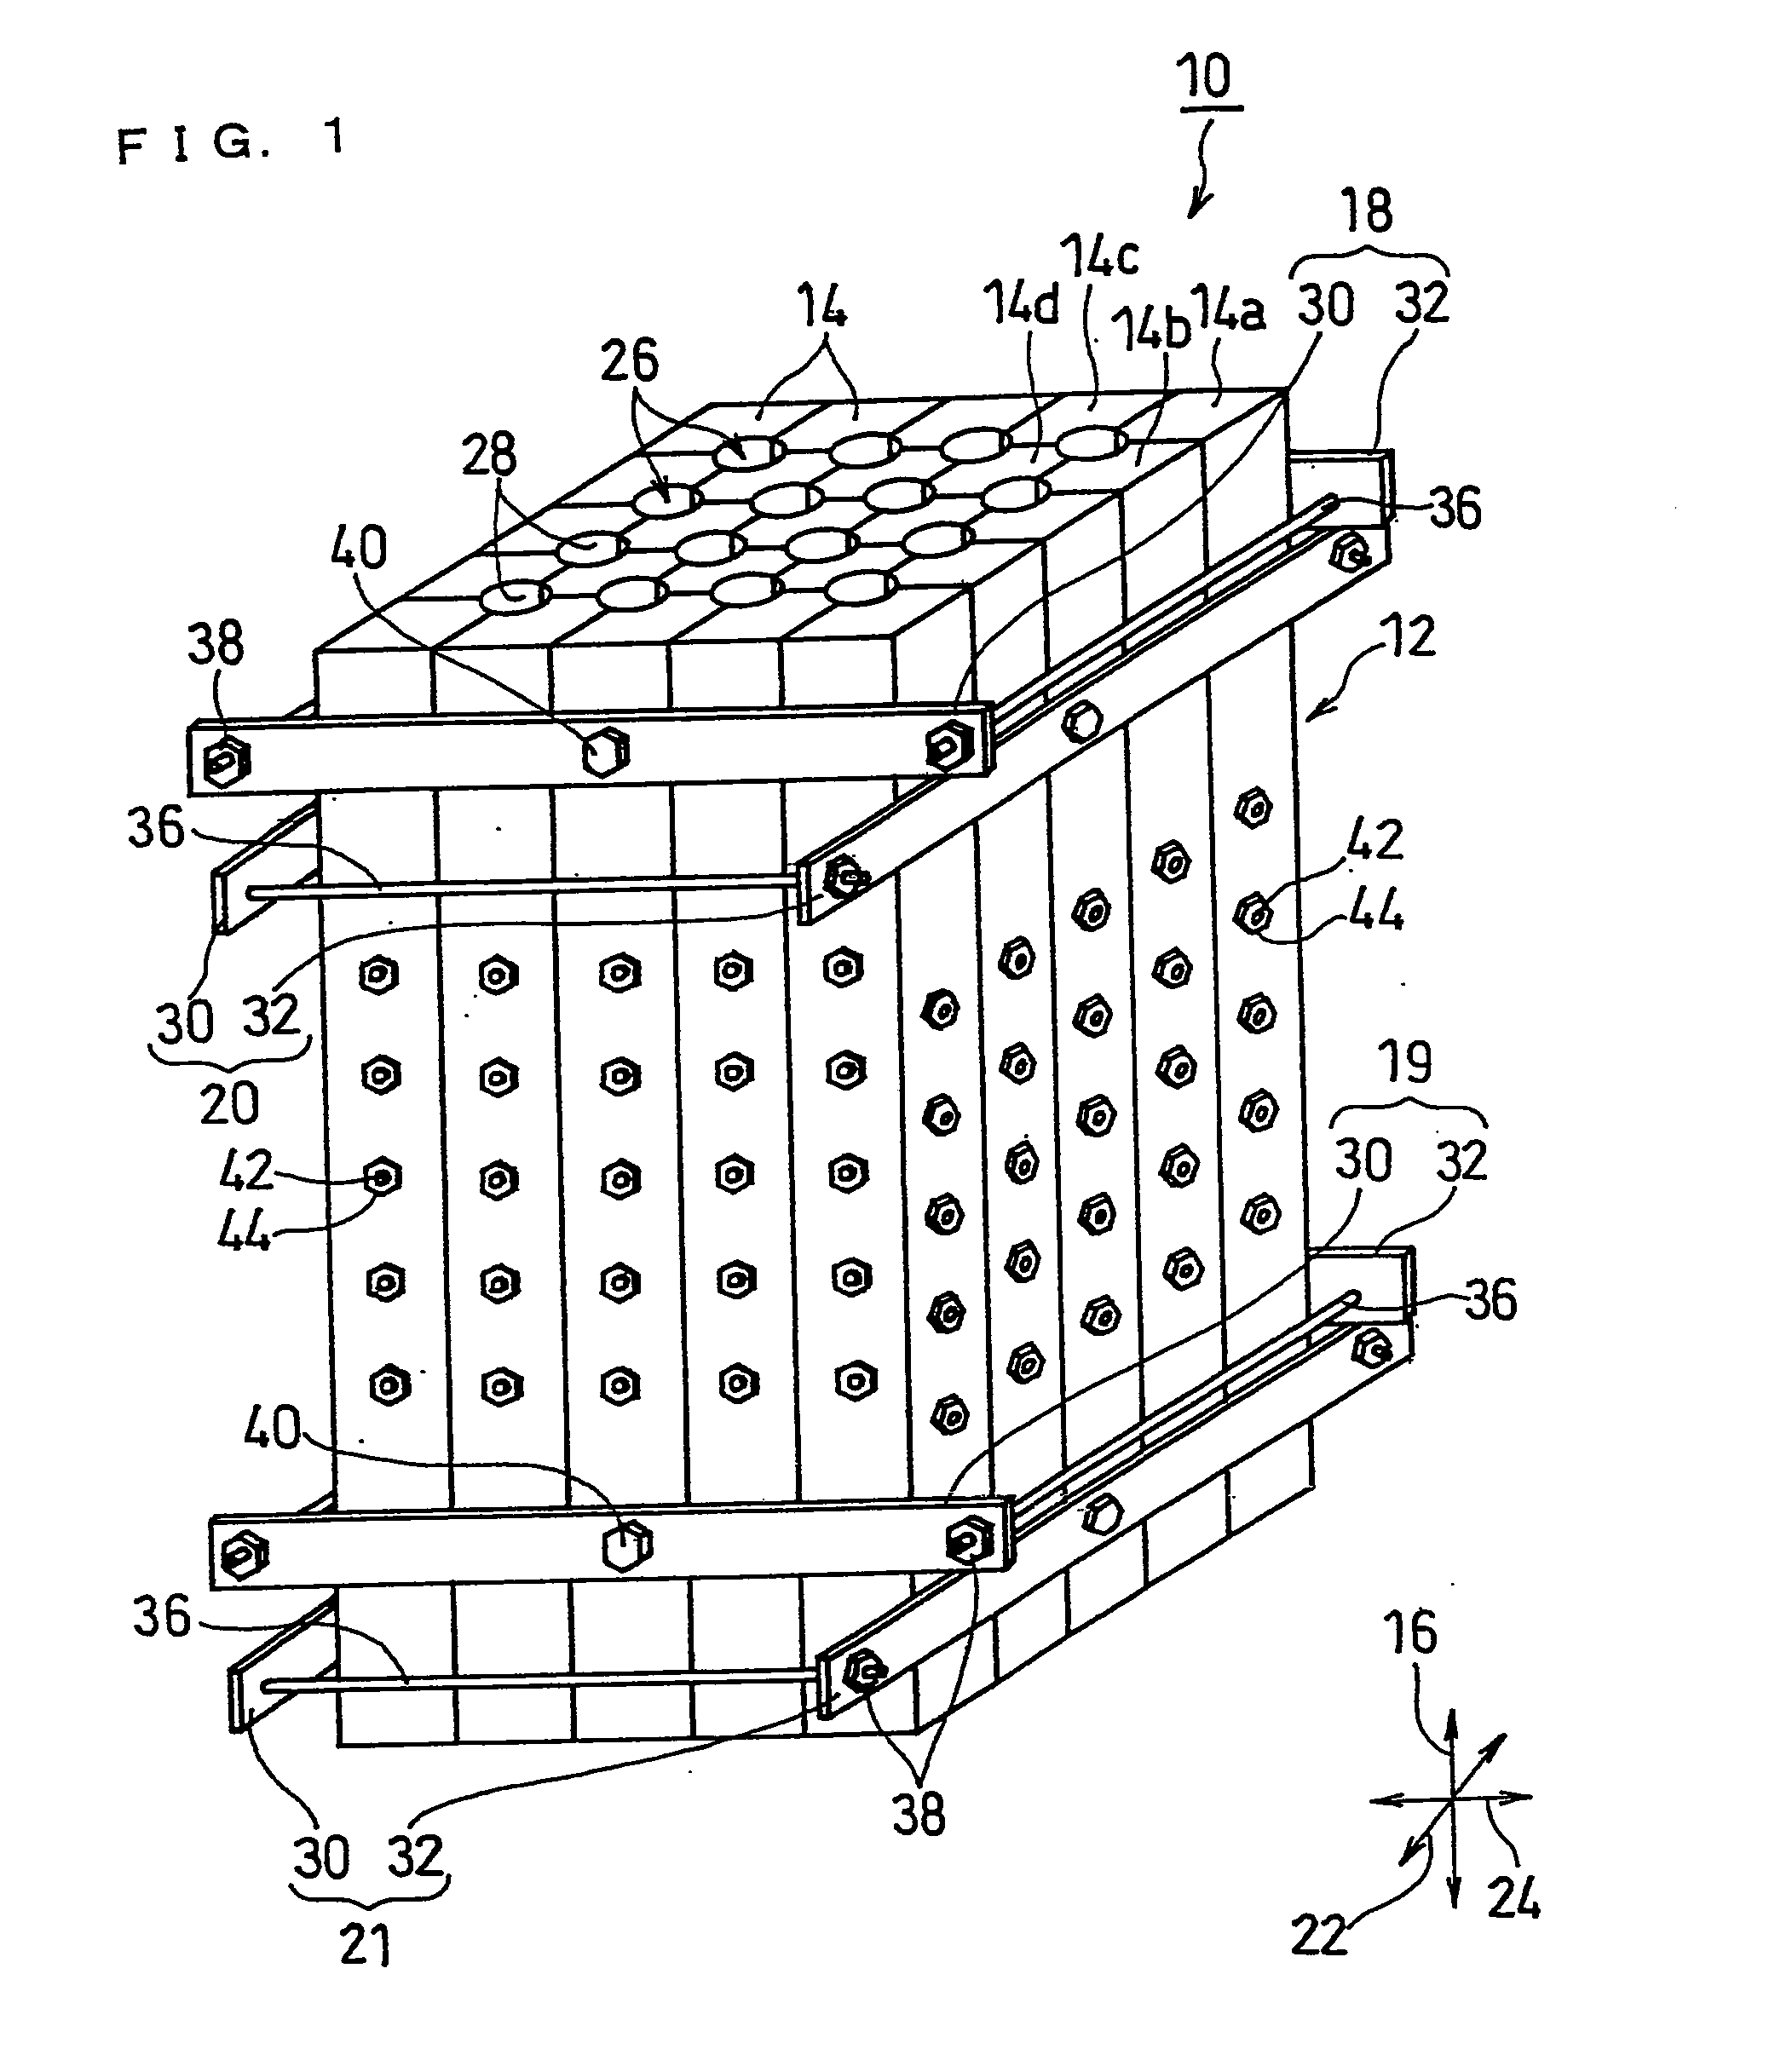 Mold for forming cast rods, casting apparatus, and production method of cast rods